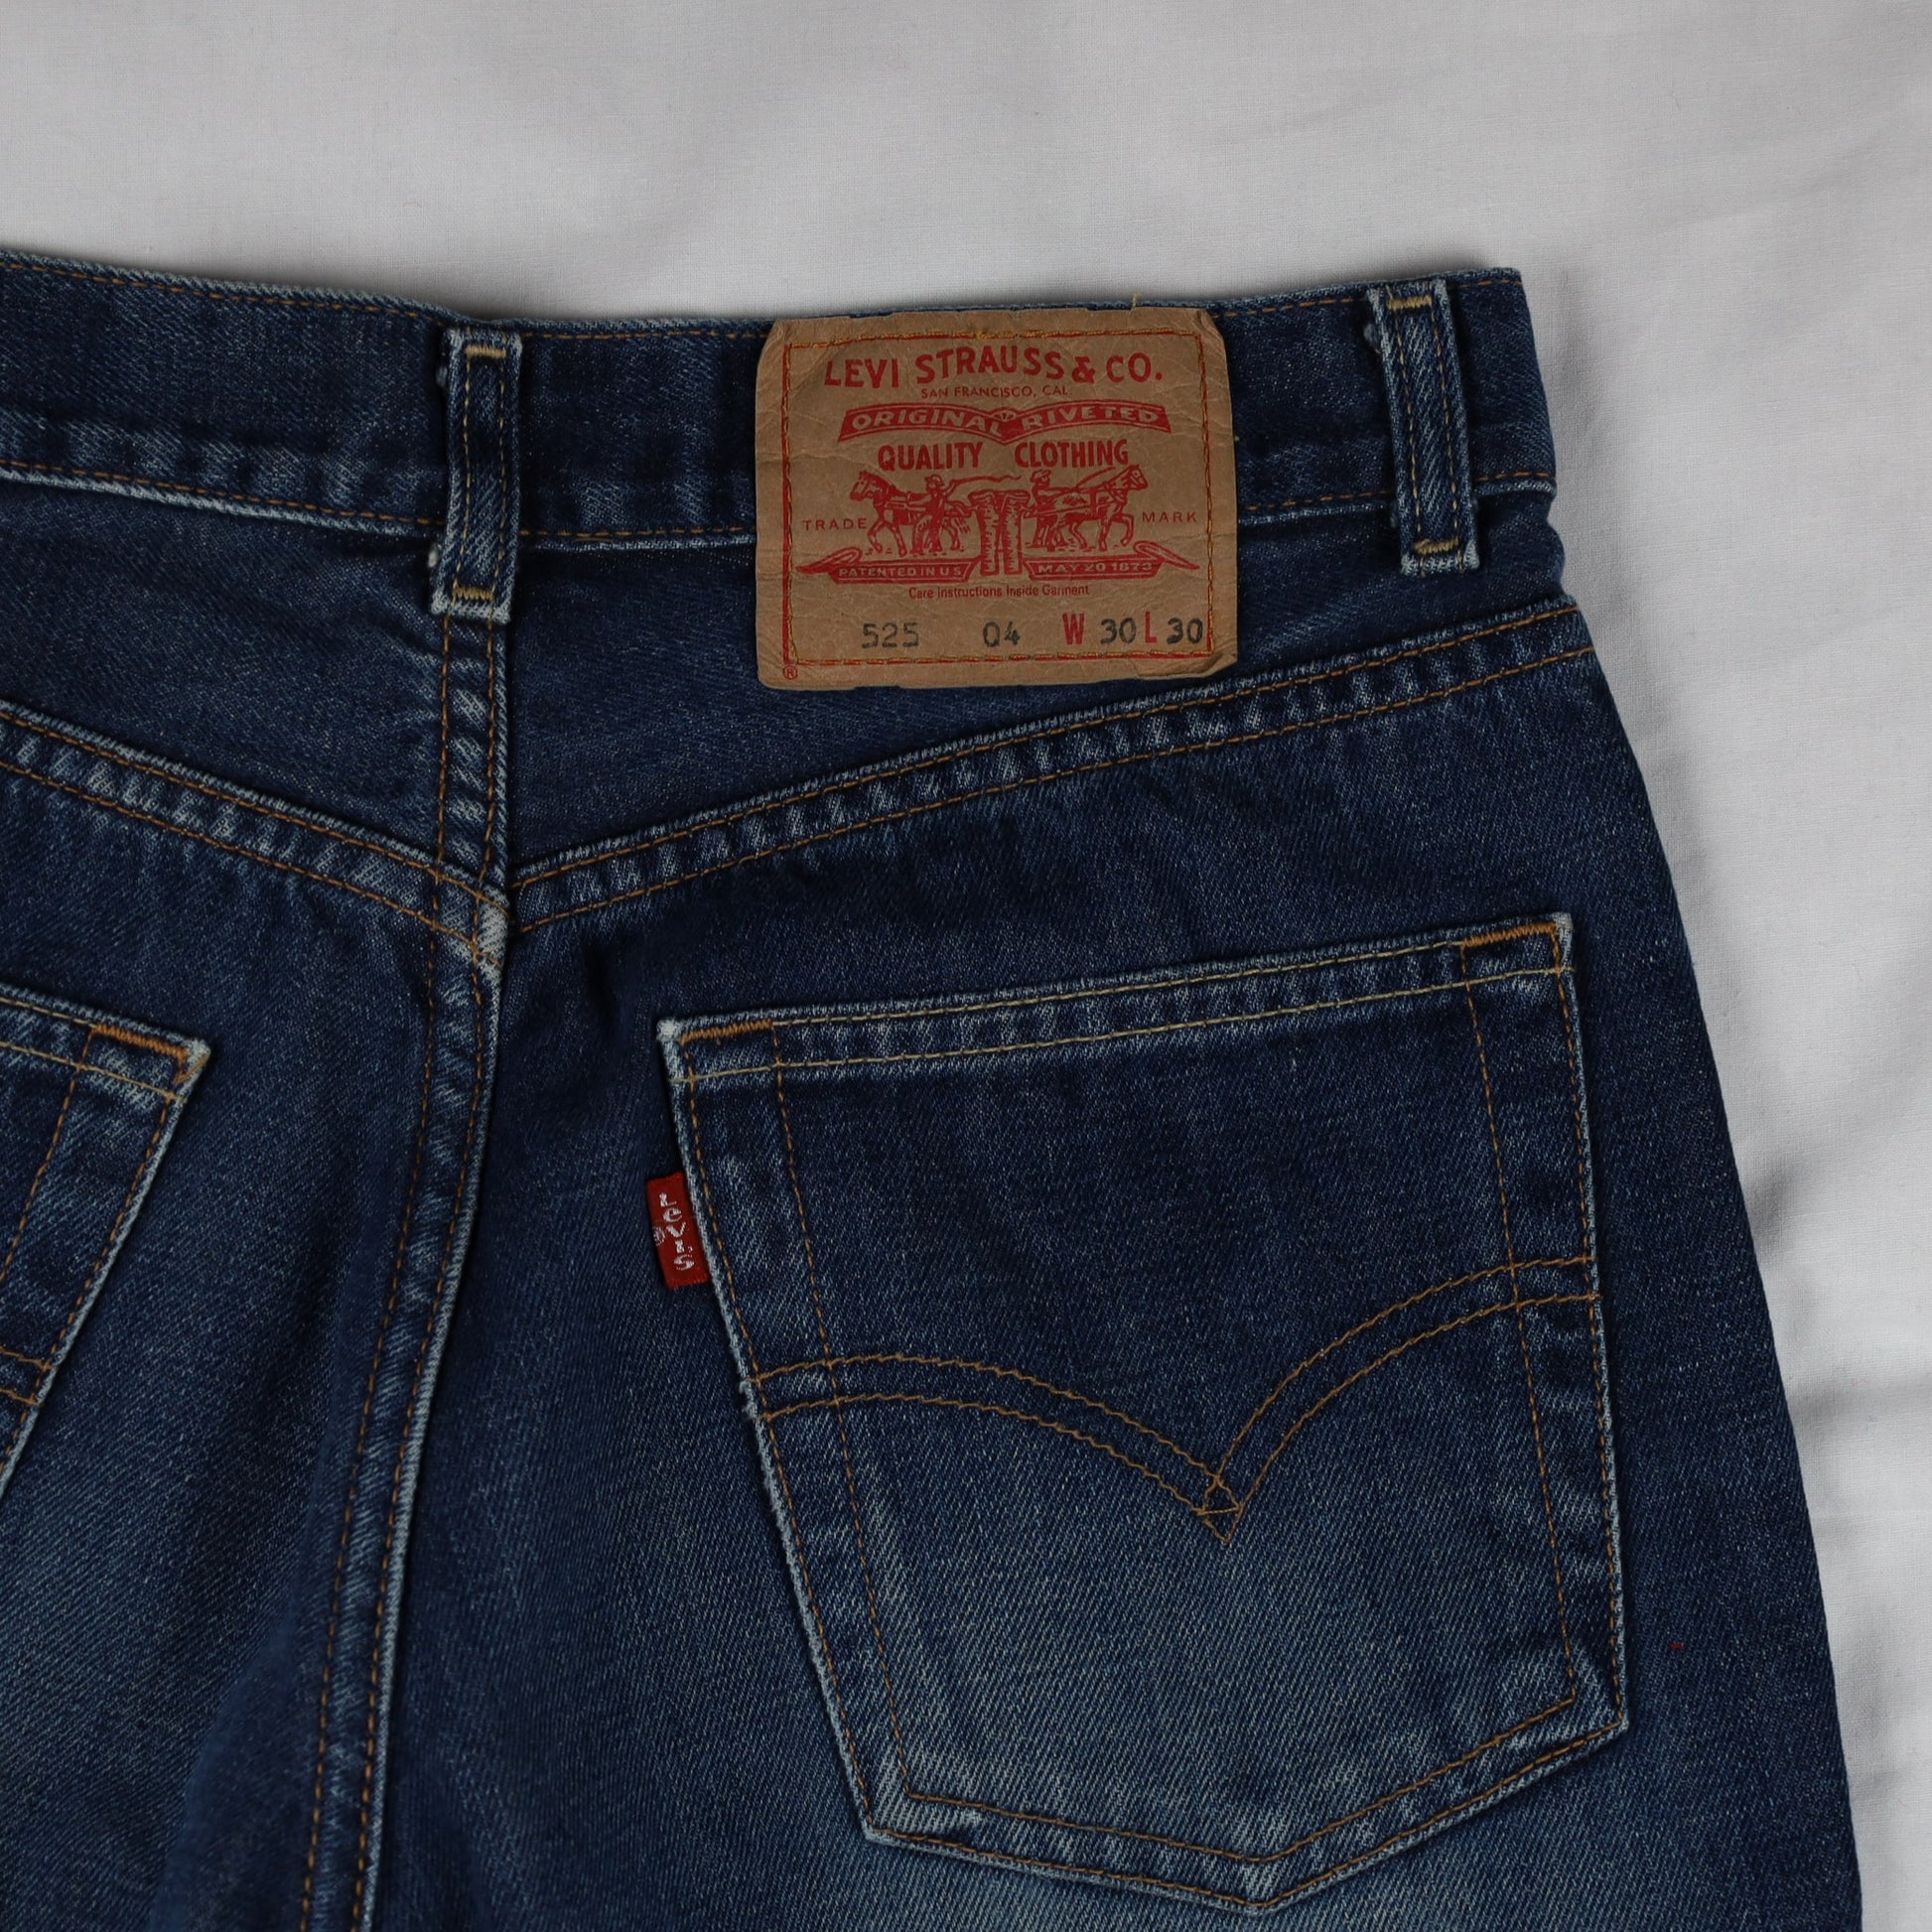 Levi's 525 Bootcut W30 L30 Jeans – Vintage in Finland